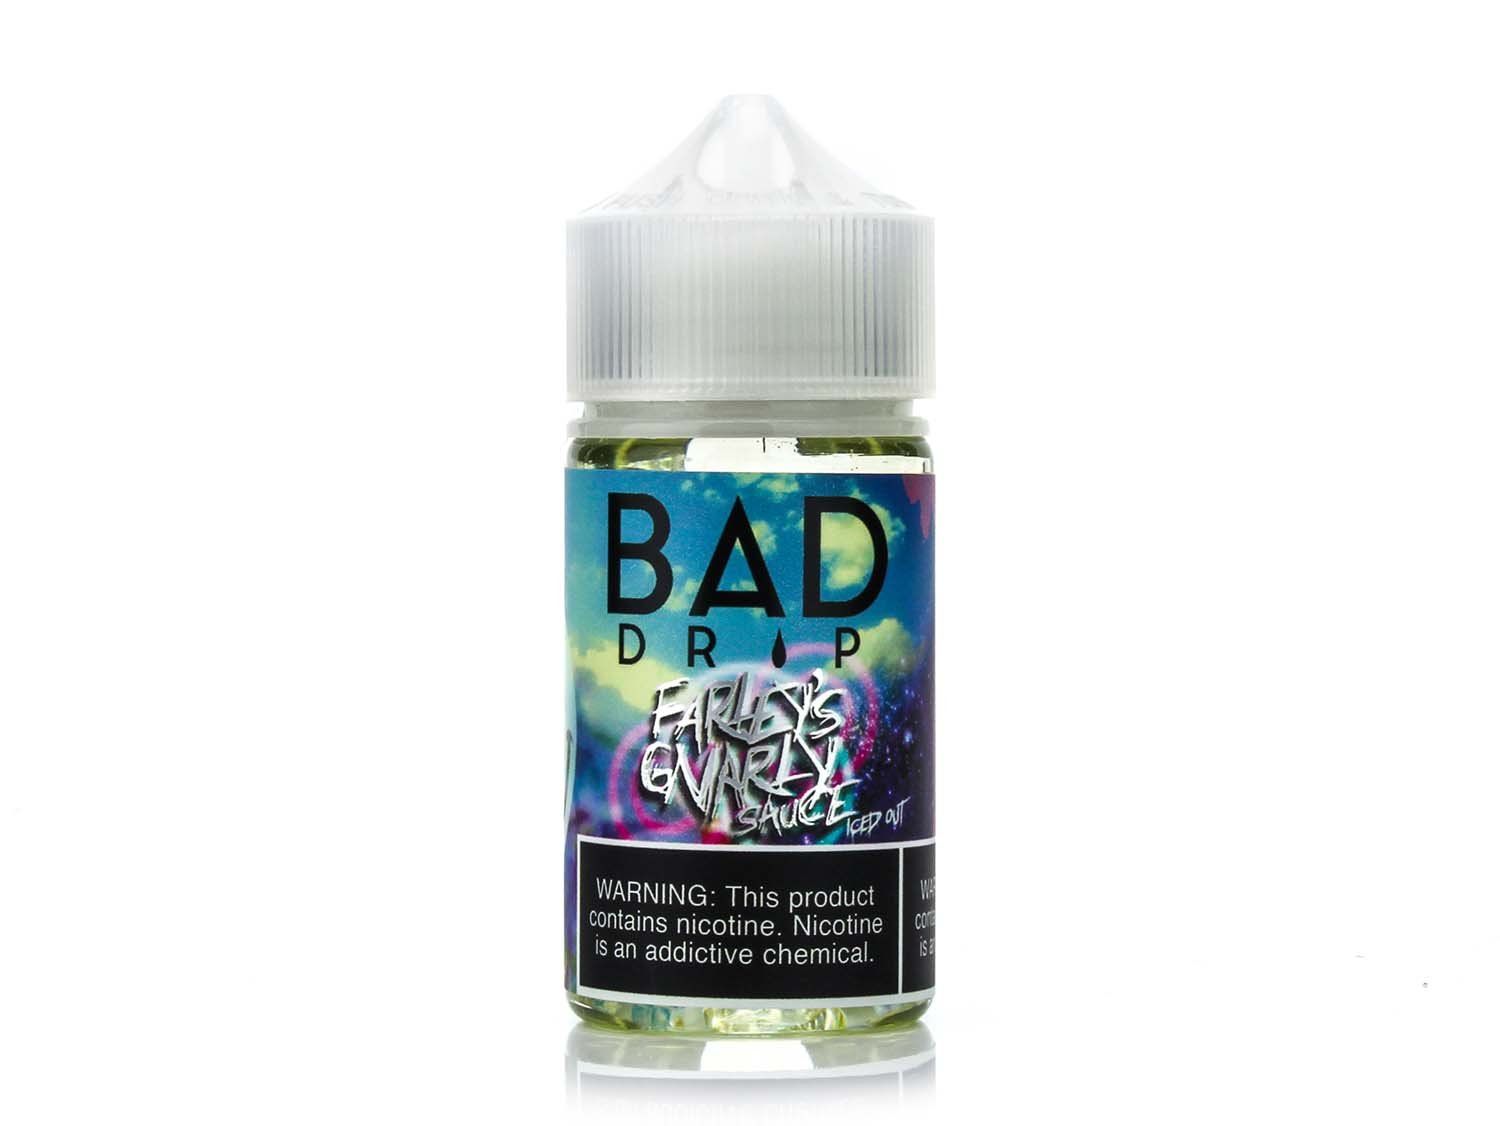 Farley's Gnarly Sauce Iced Out by Bad Drip Series 60mL Bottle